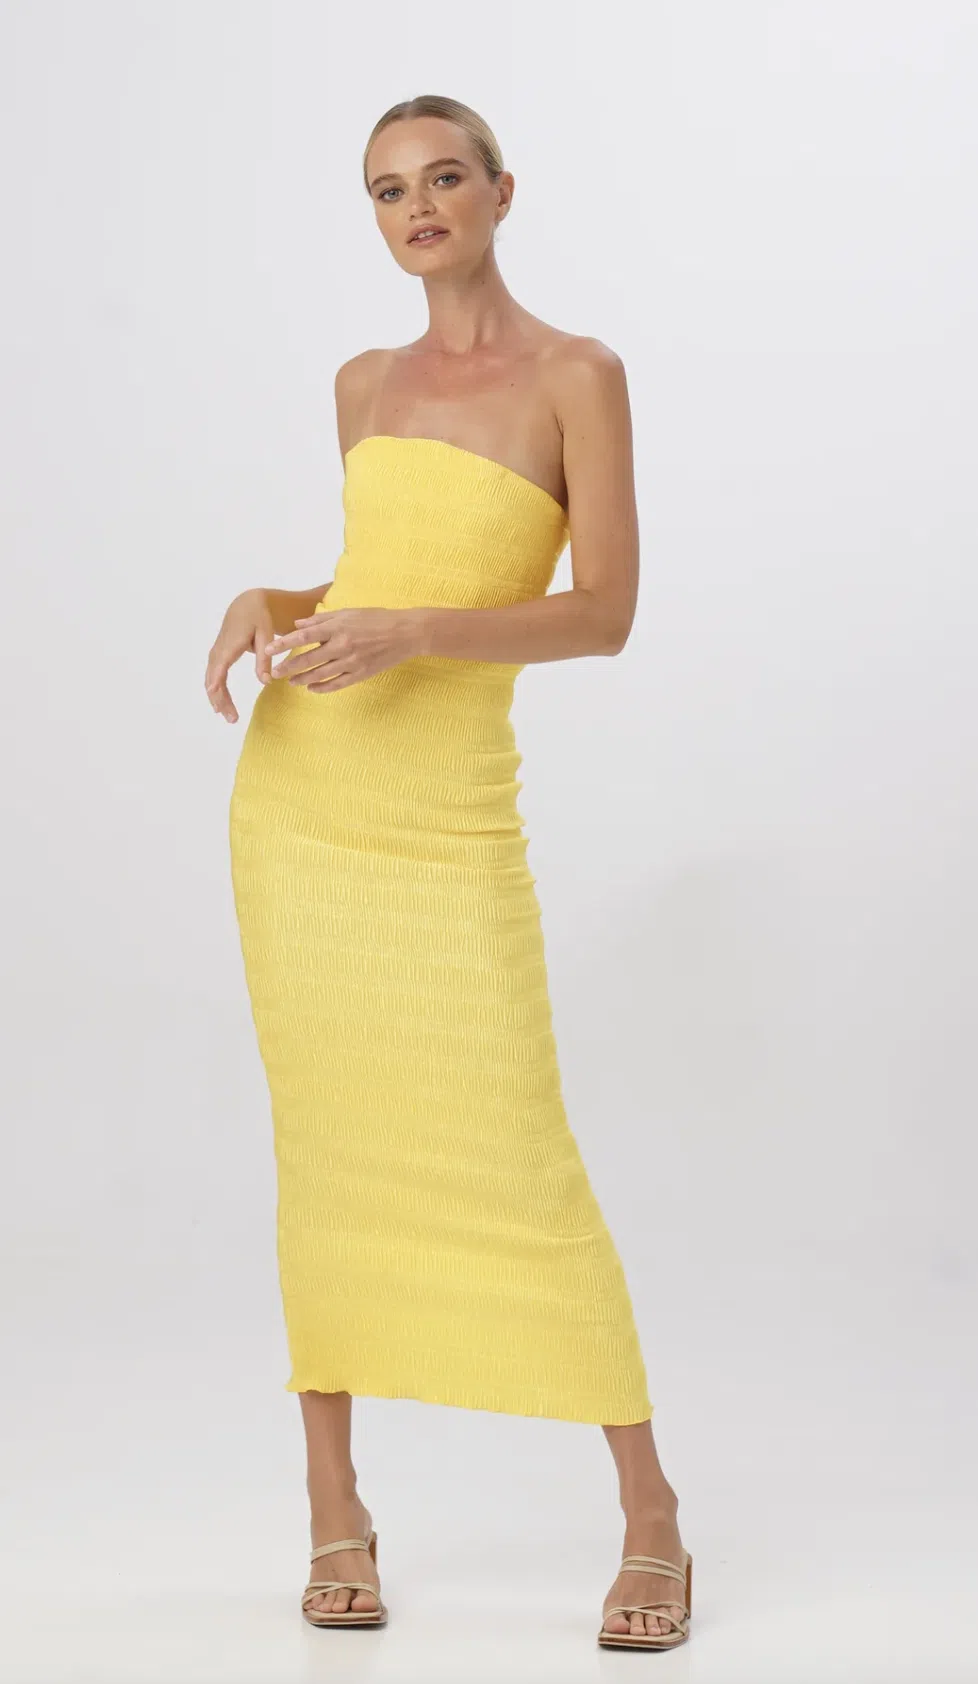 💛 RACHEL GILBERT Canary Yellow Sarah Side Ruffle Frill Stretch Crepe Gown  6 US | eBay